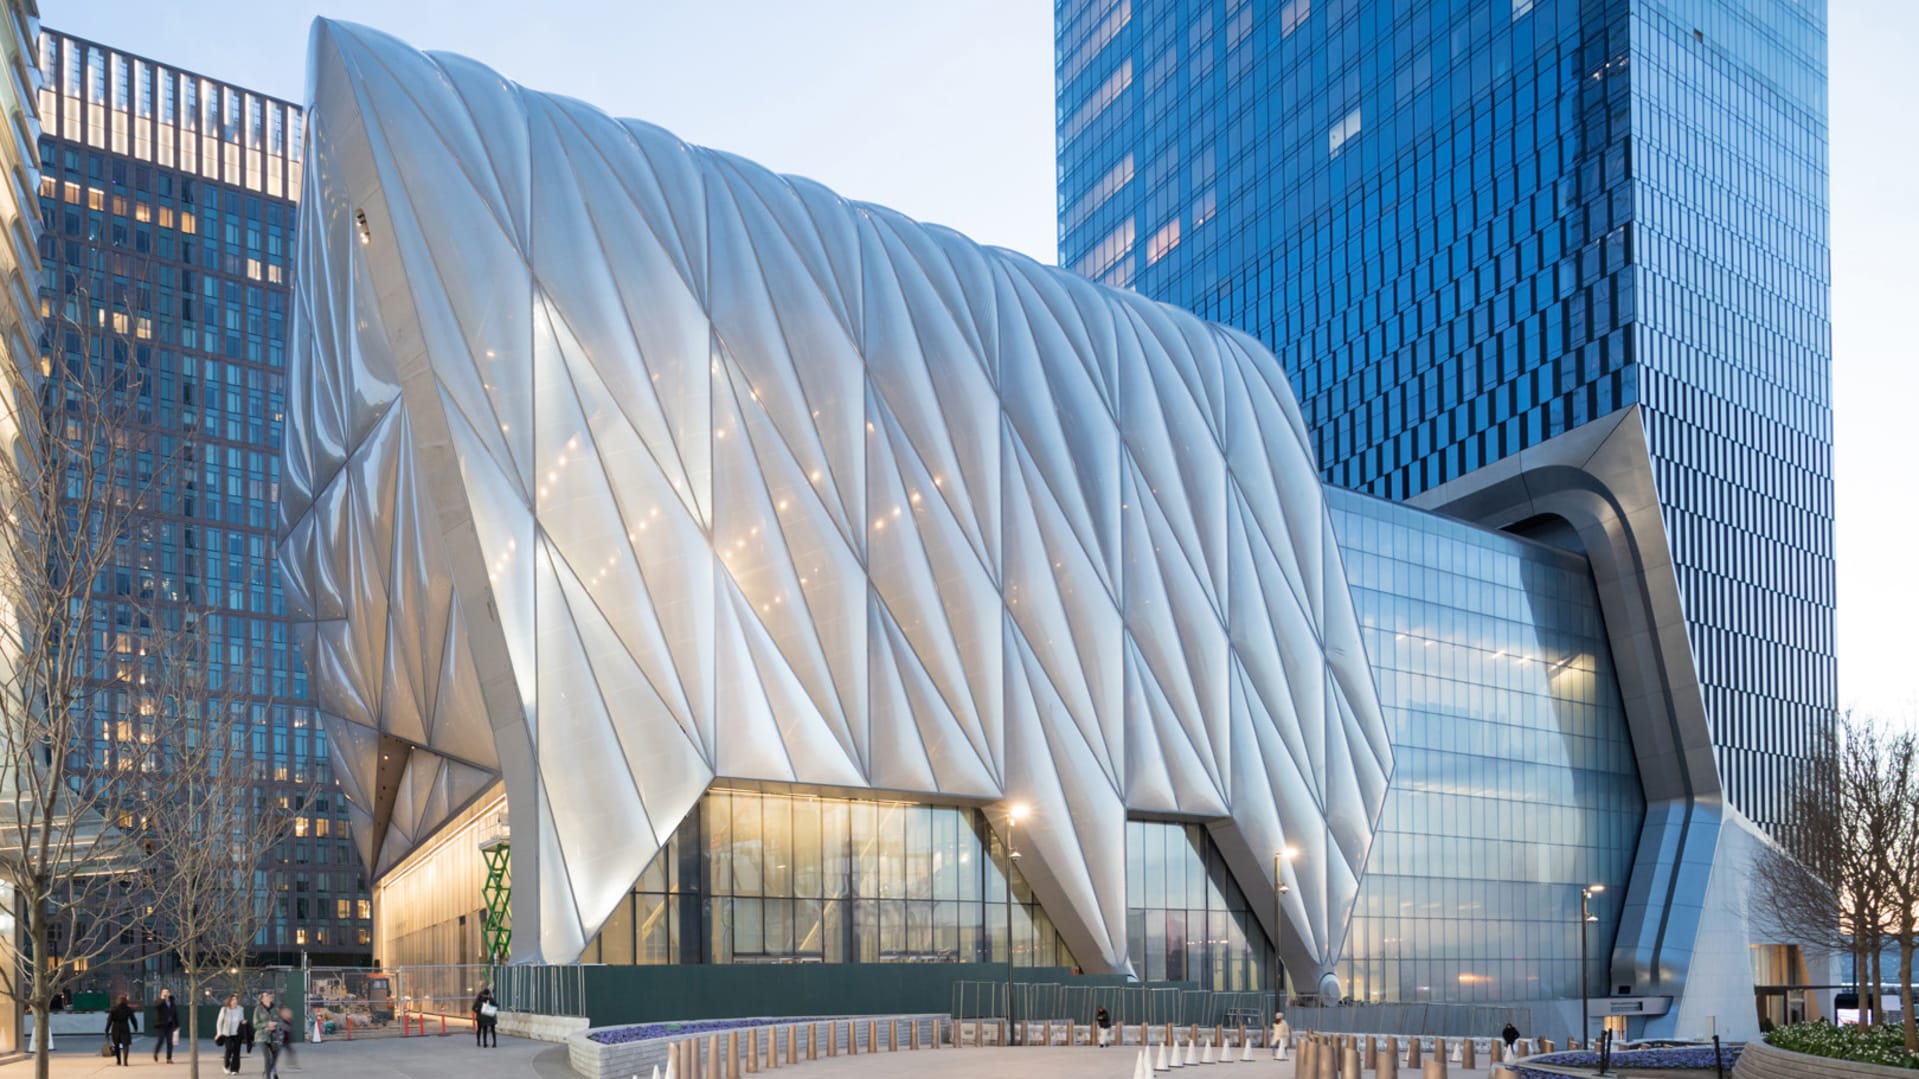 NYC’s first shapeshifting building is finally here (The price tag? $400 million)